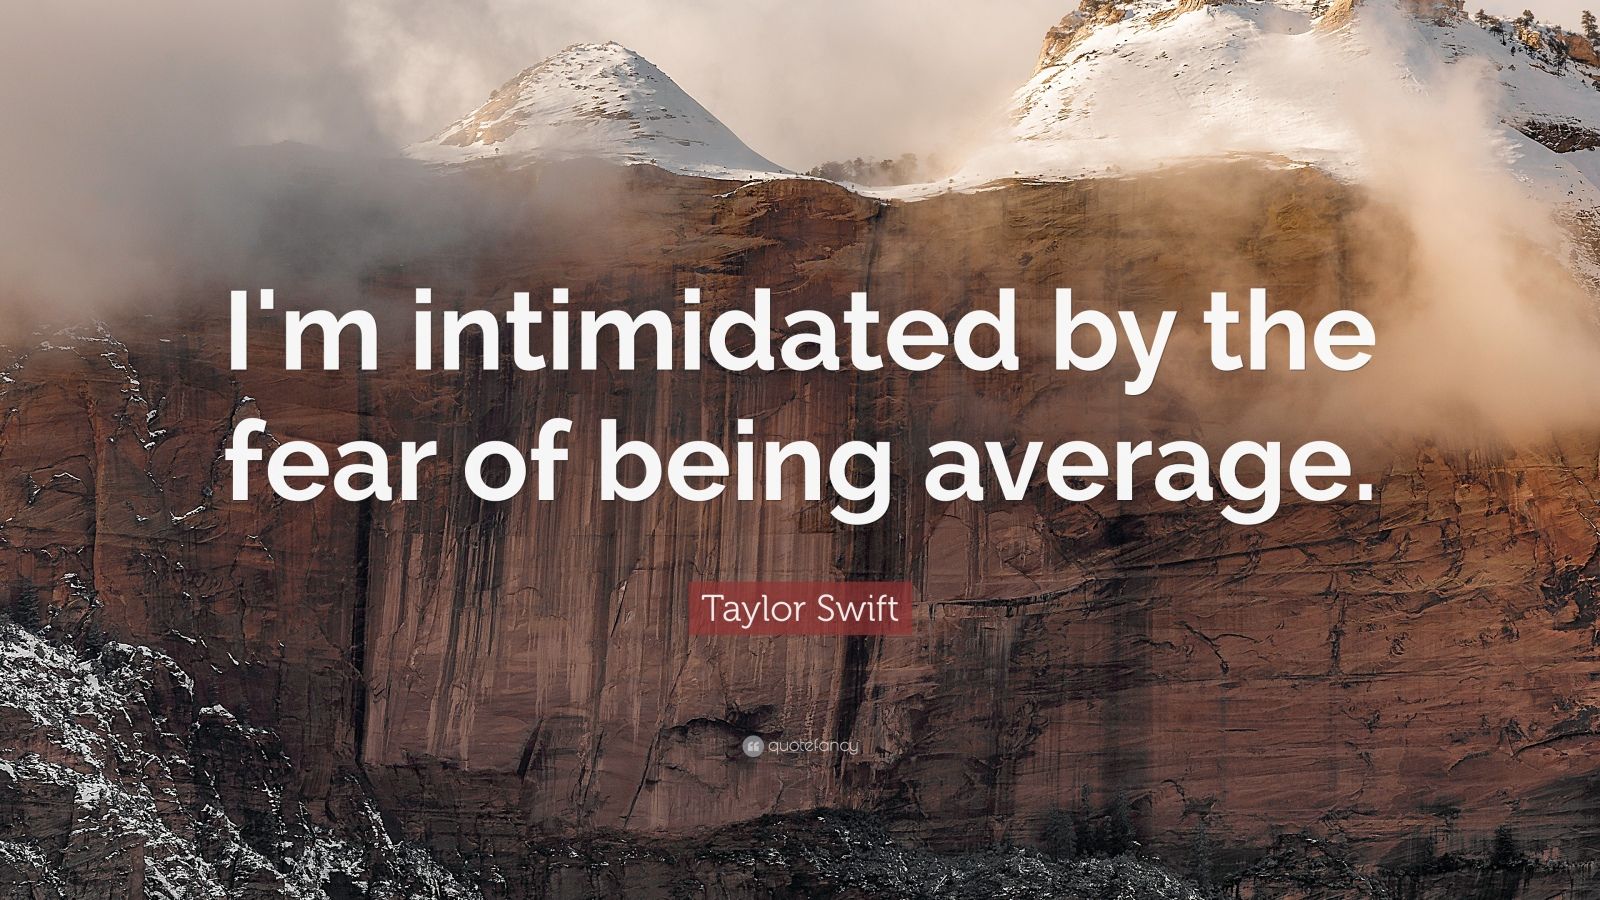 Taylor Swift Quote: “I'm intimidated by the fear of being average.” (15